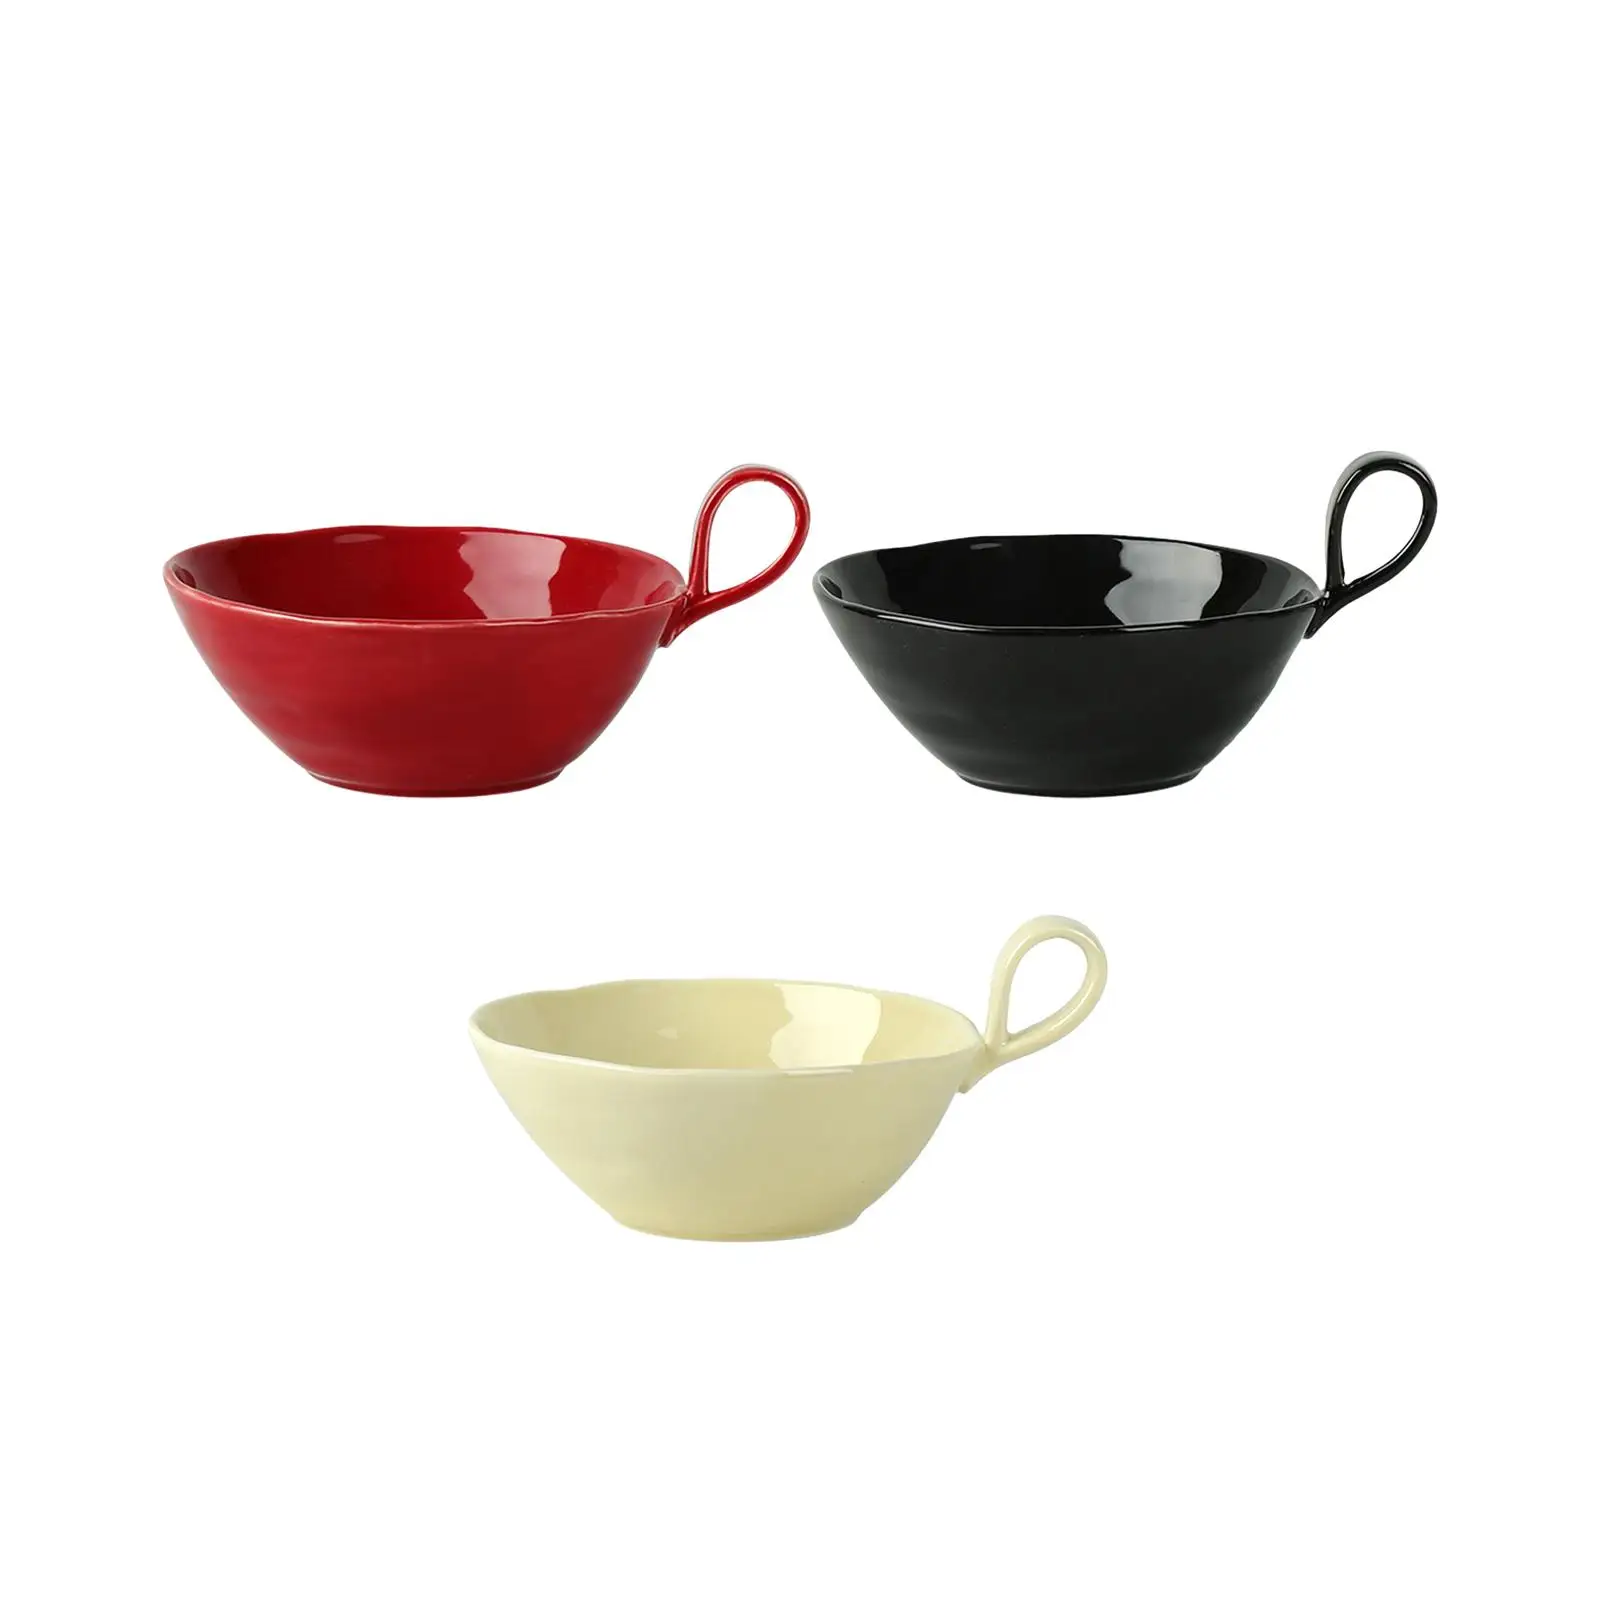 Ceramic Mixing Bowl with Handle Porcelain Kitchen Utensils Baking Accessory Dessert Bowl for Kitchen Dessert Baking Soup Cooking